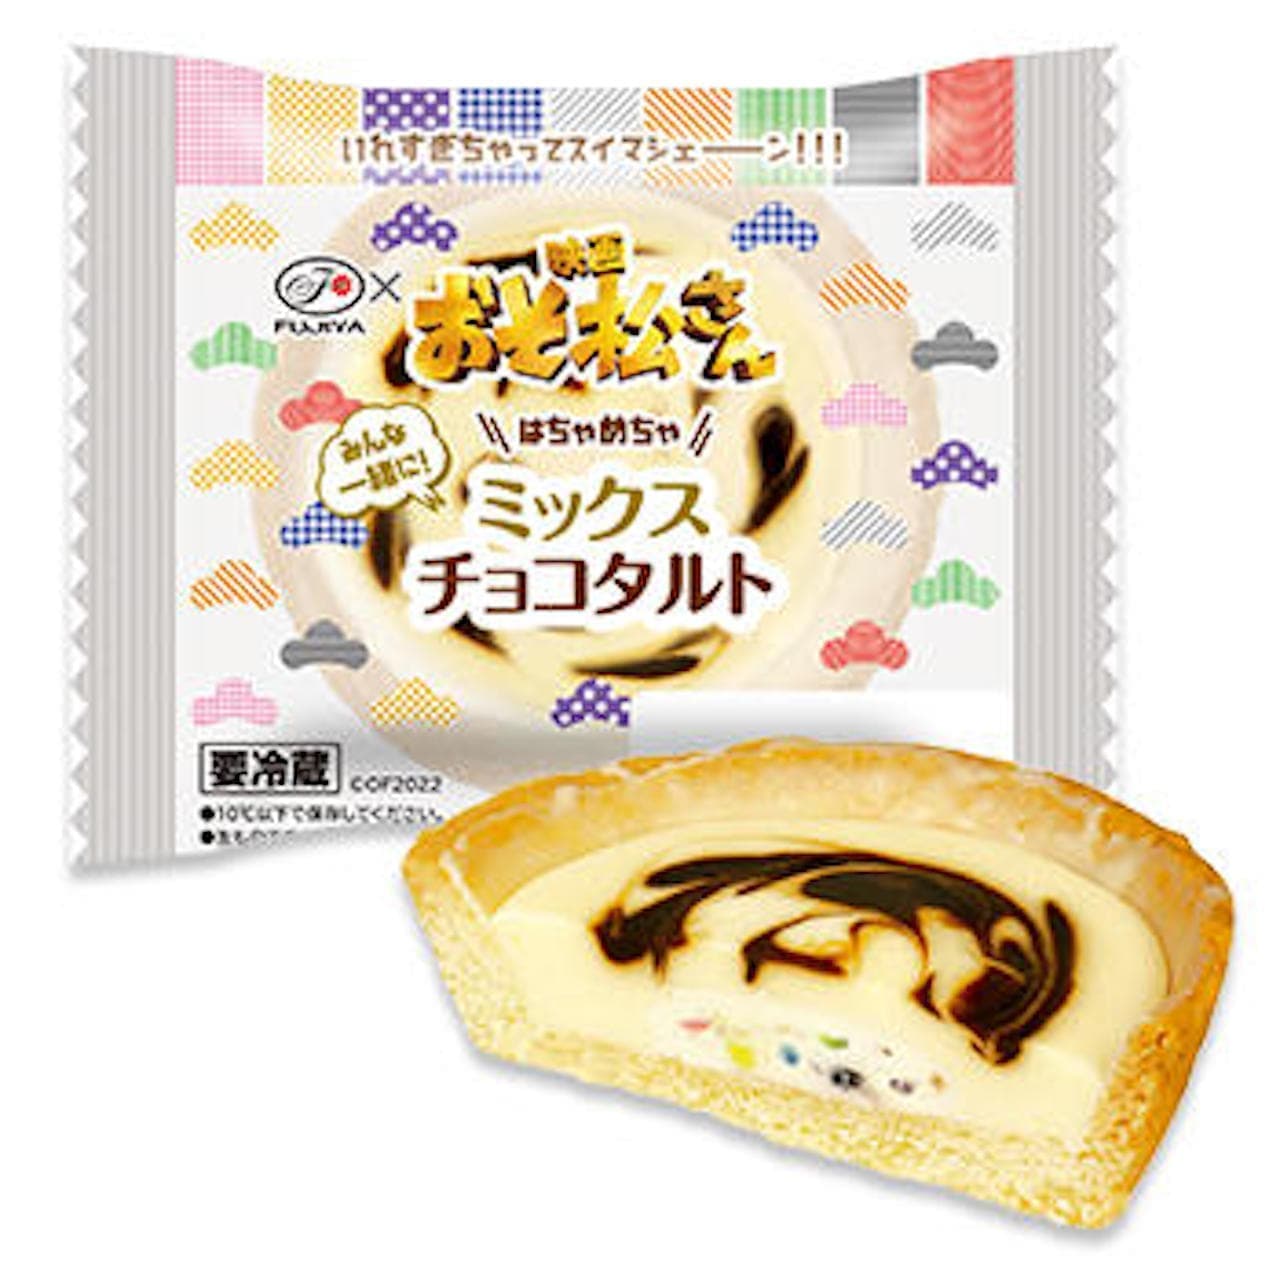 Collaboration of "Osomatsu-san" movie. We're going to have a lot of fun! A crazy mixed chocolate tart!